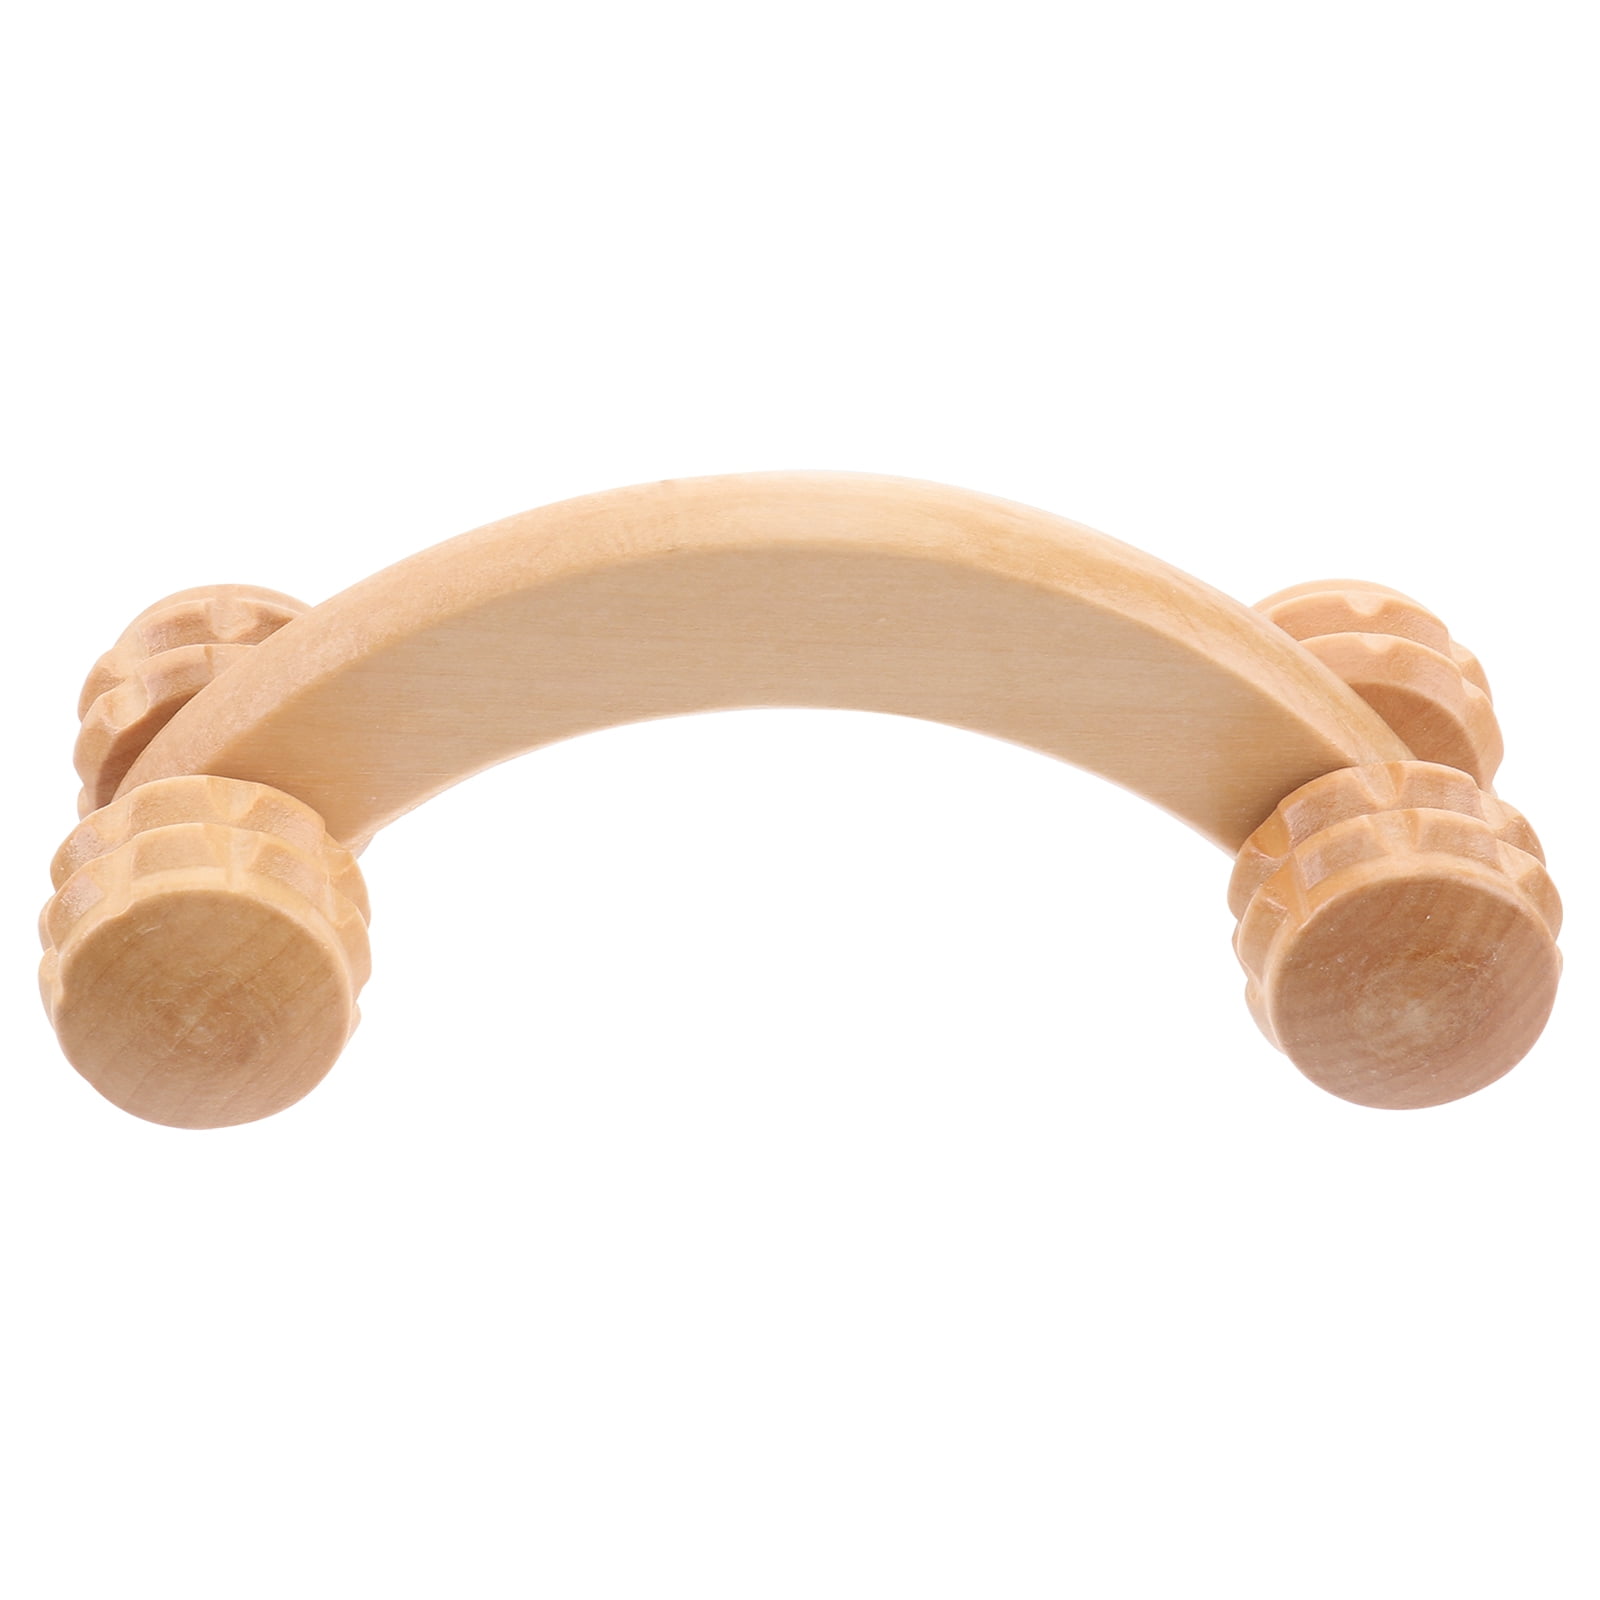 Handheld Wooden Curved Massage Roller for Waist and Thigh, 16 Inch Wood  Therapy Massage Tools, Rolling Body Massager for Pain Relief, Cellulite (12